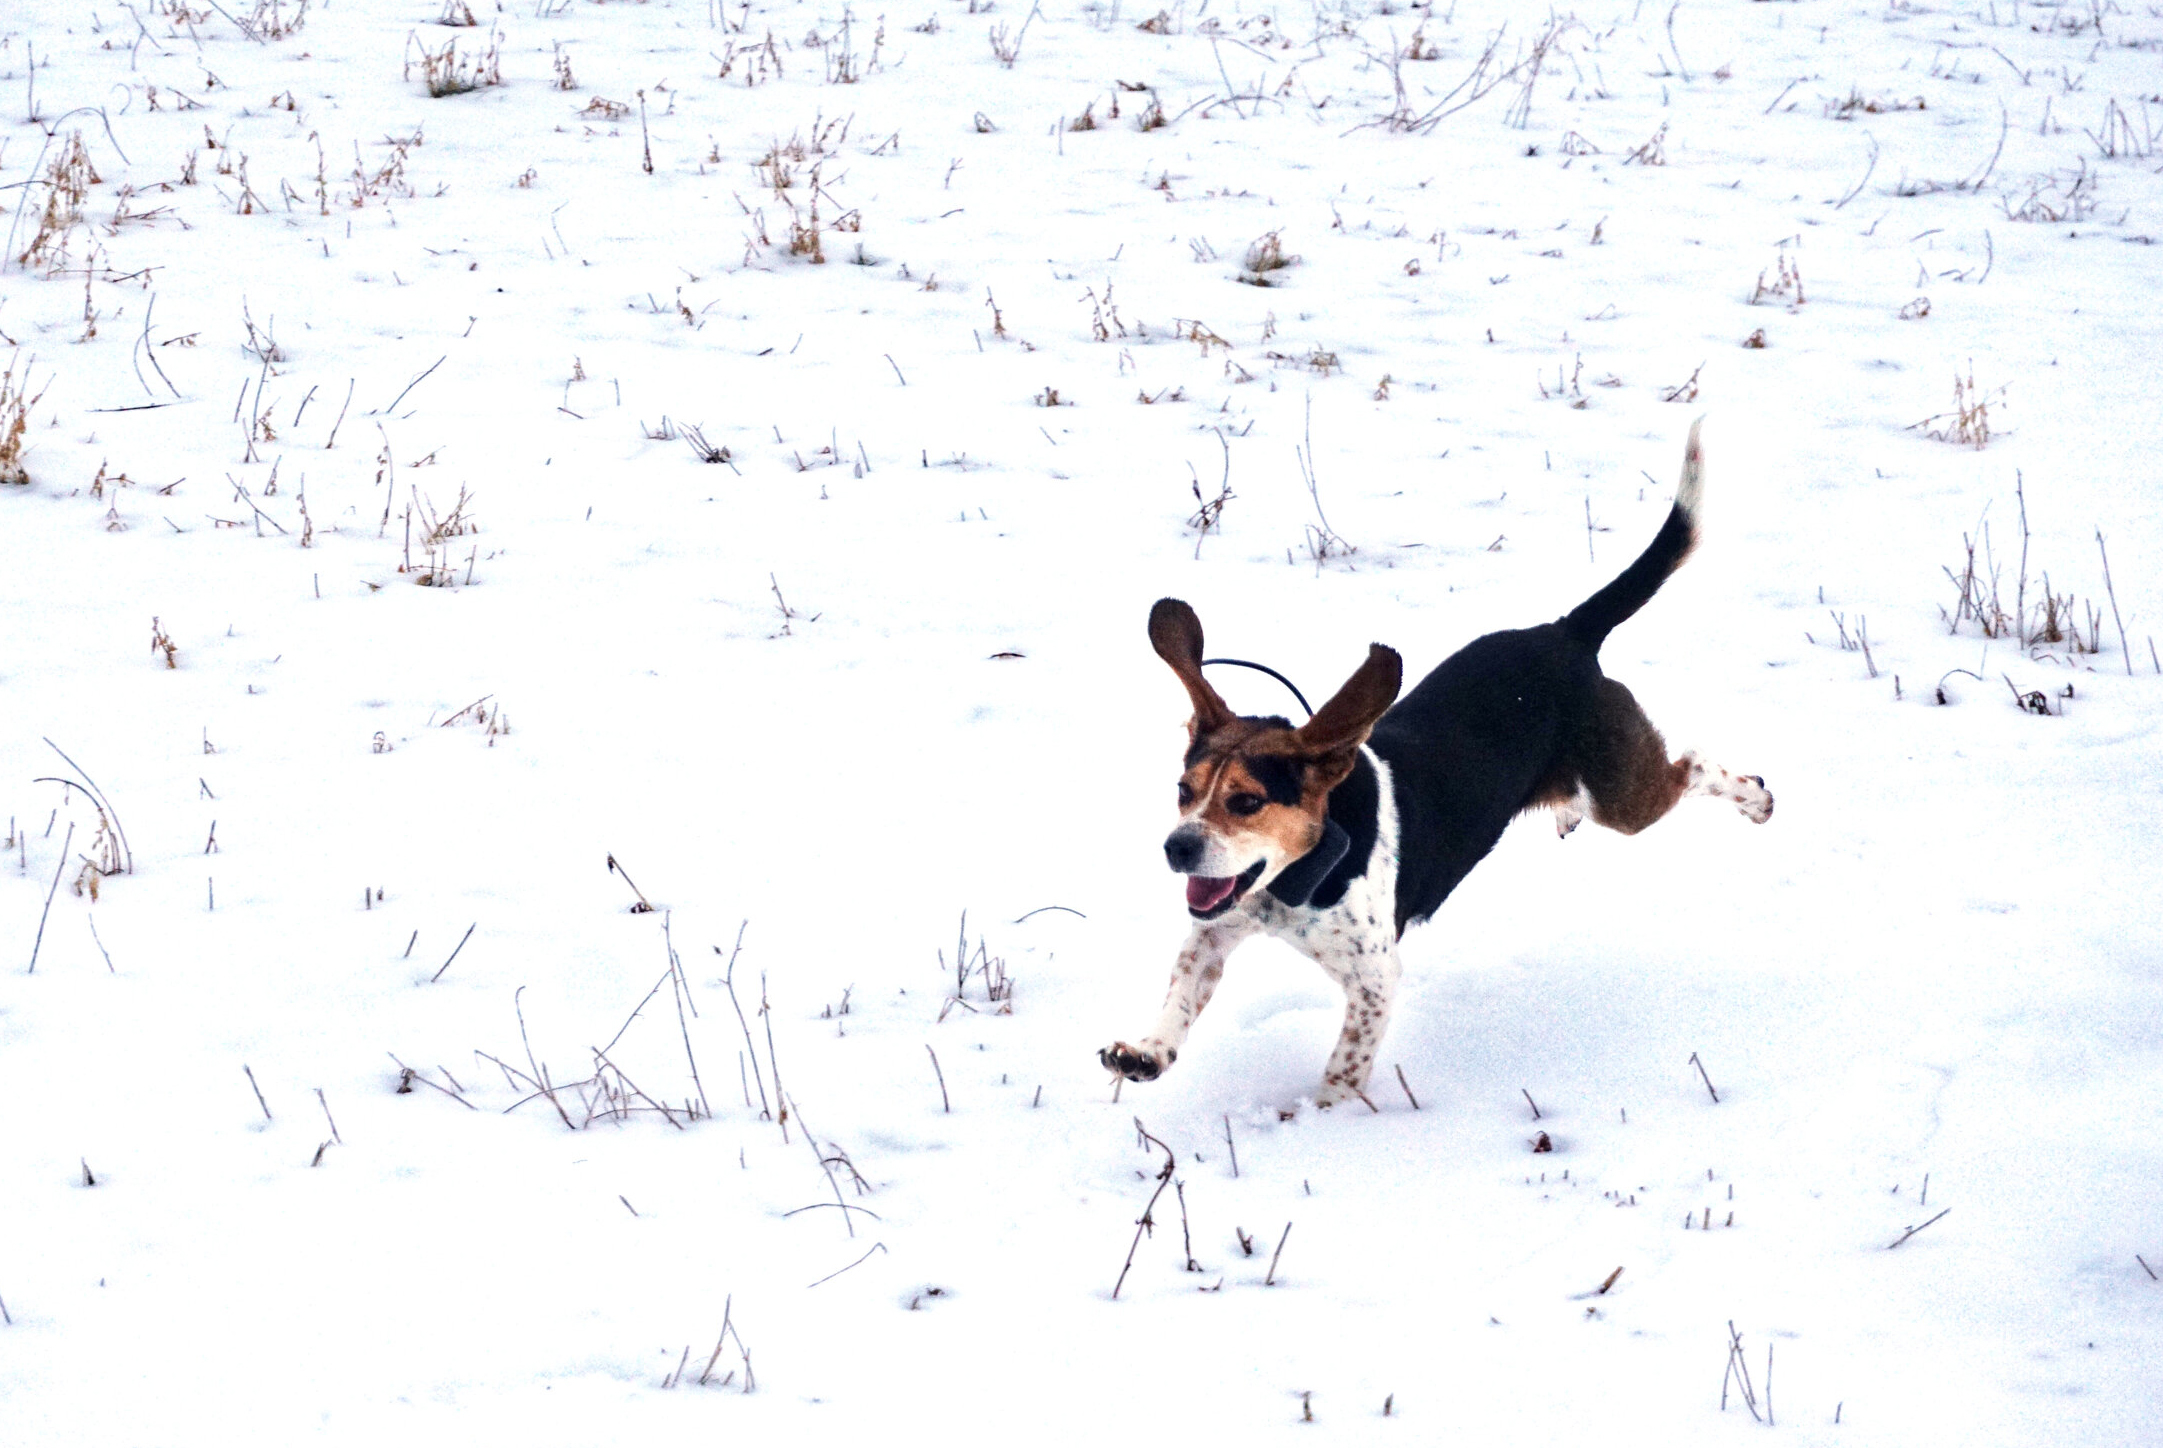 Anti-hunters are trying to restrict beagle training and rabbit hunting.